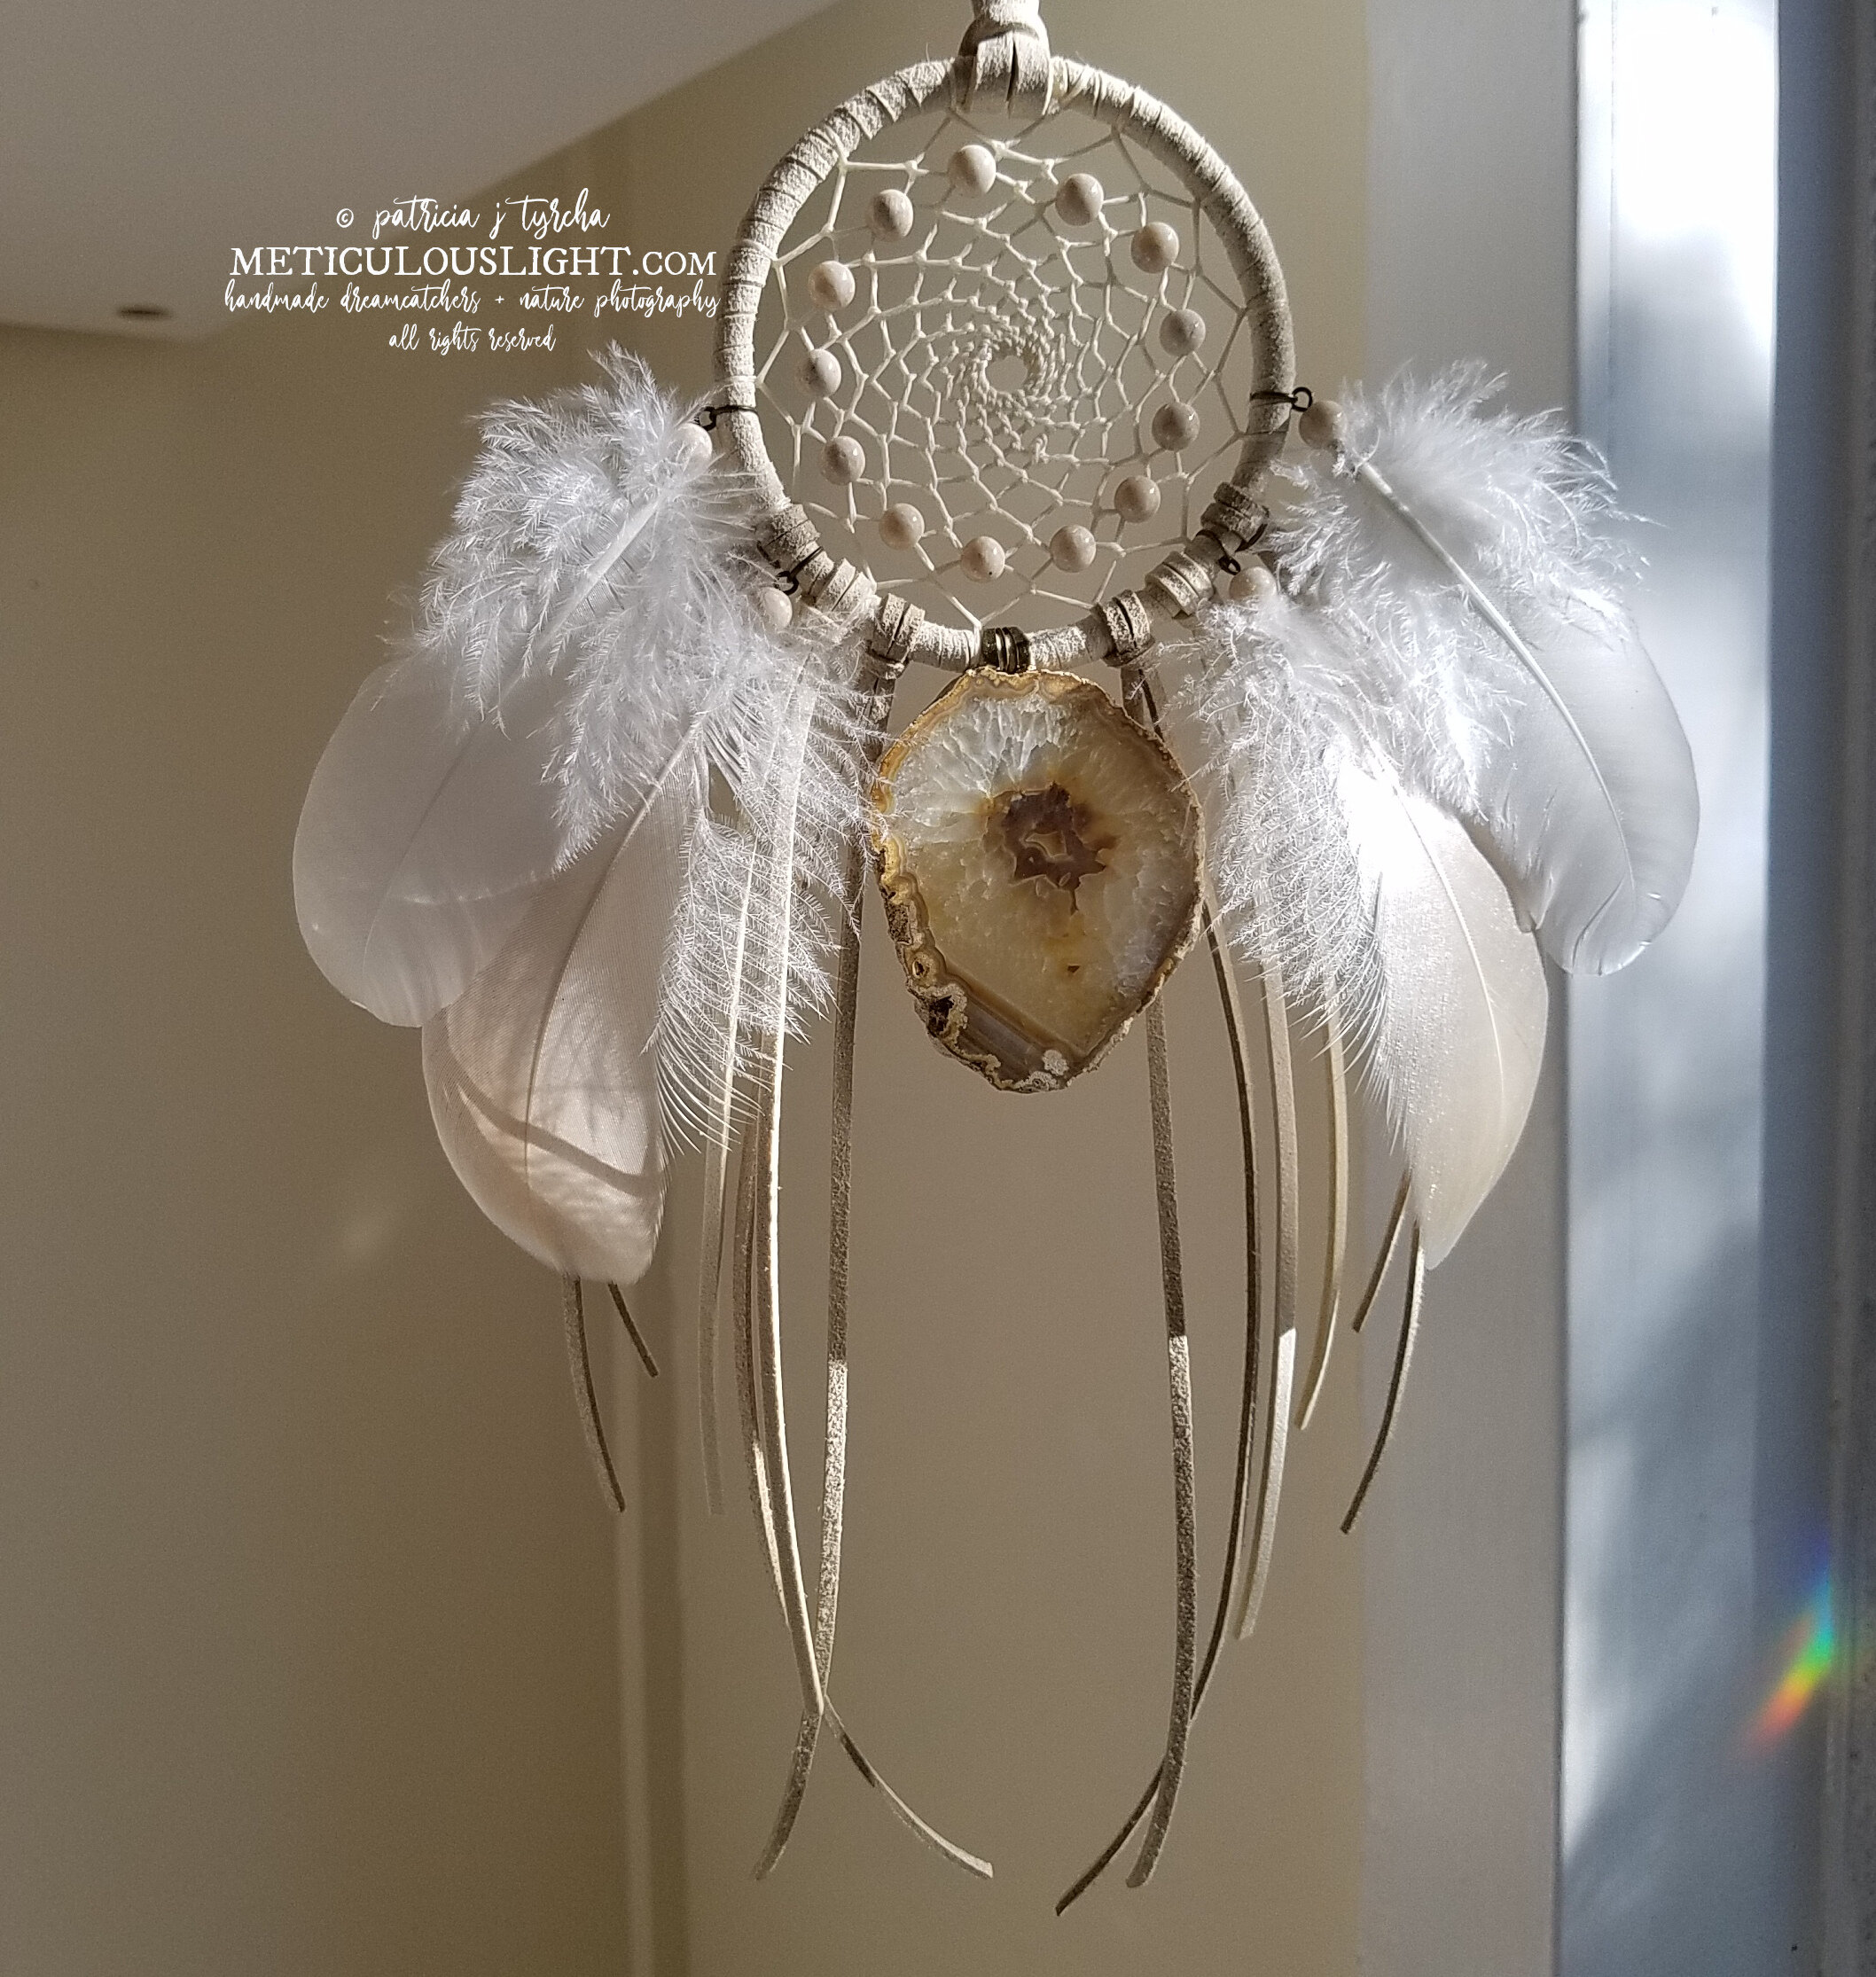 © patricia j tyrcha Natrural Geode Slice Dream Catcher, cream, tan, cruelty free feathers, traditional, natural stone beads ALL RIGHTS REERVED2 - Copy.jpg